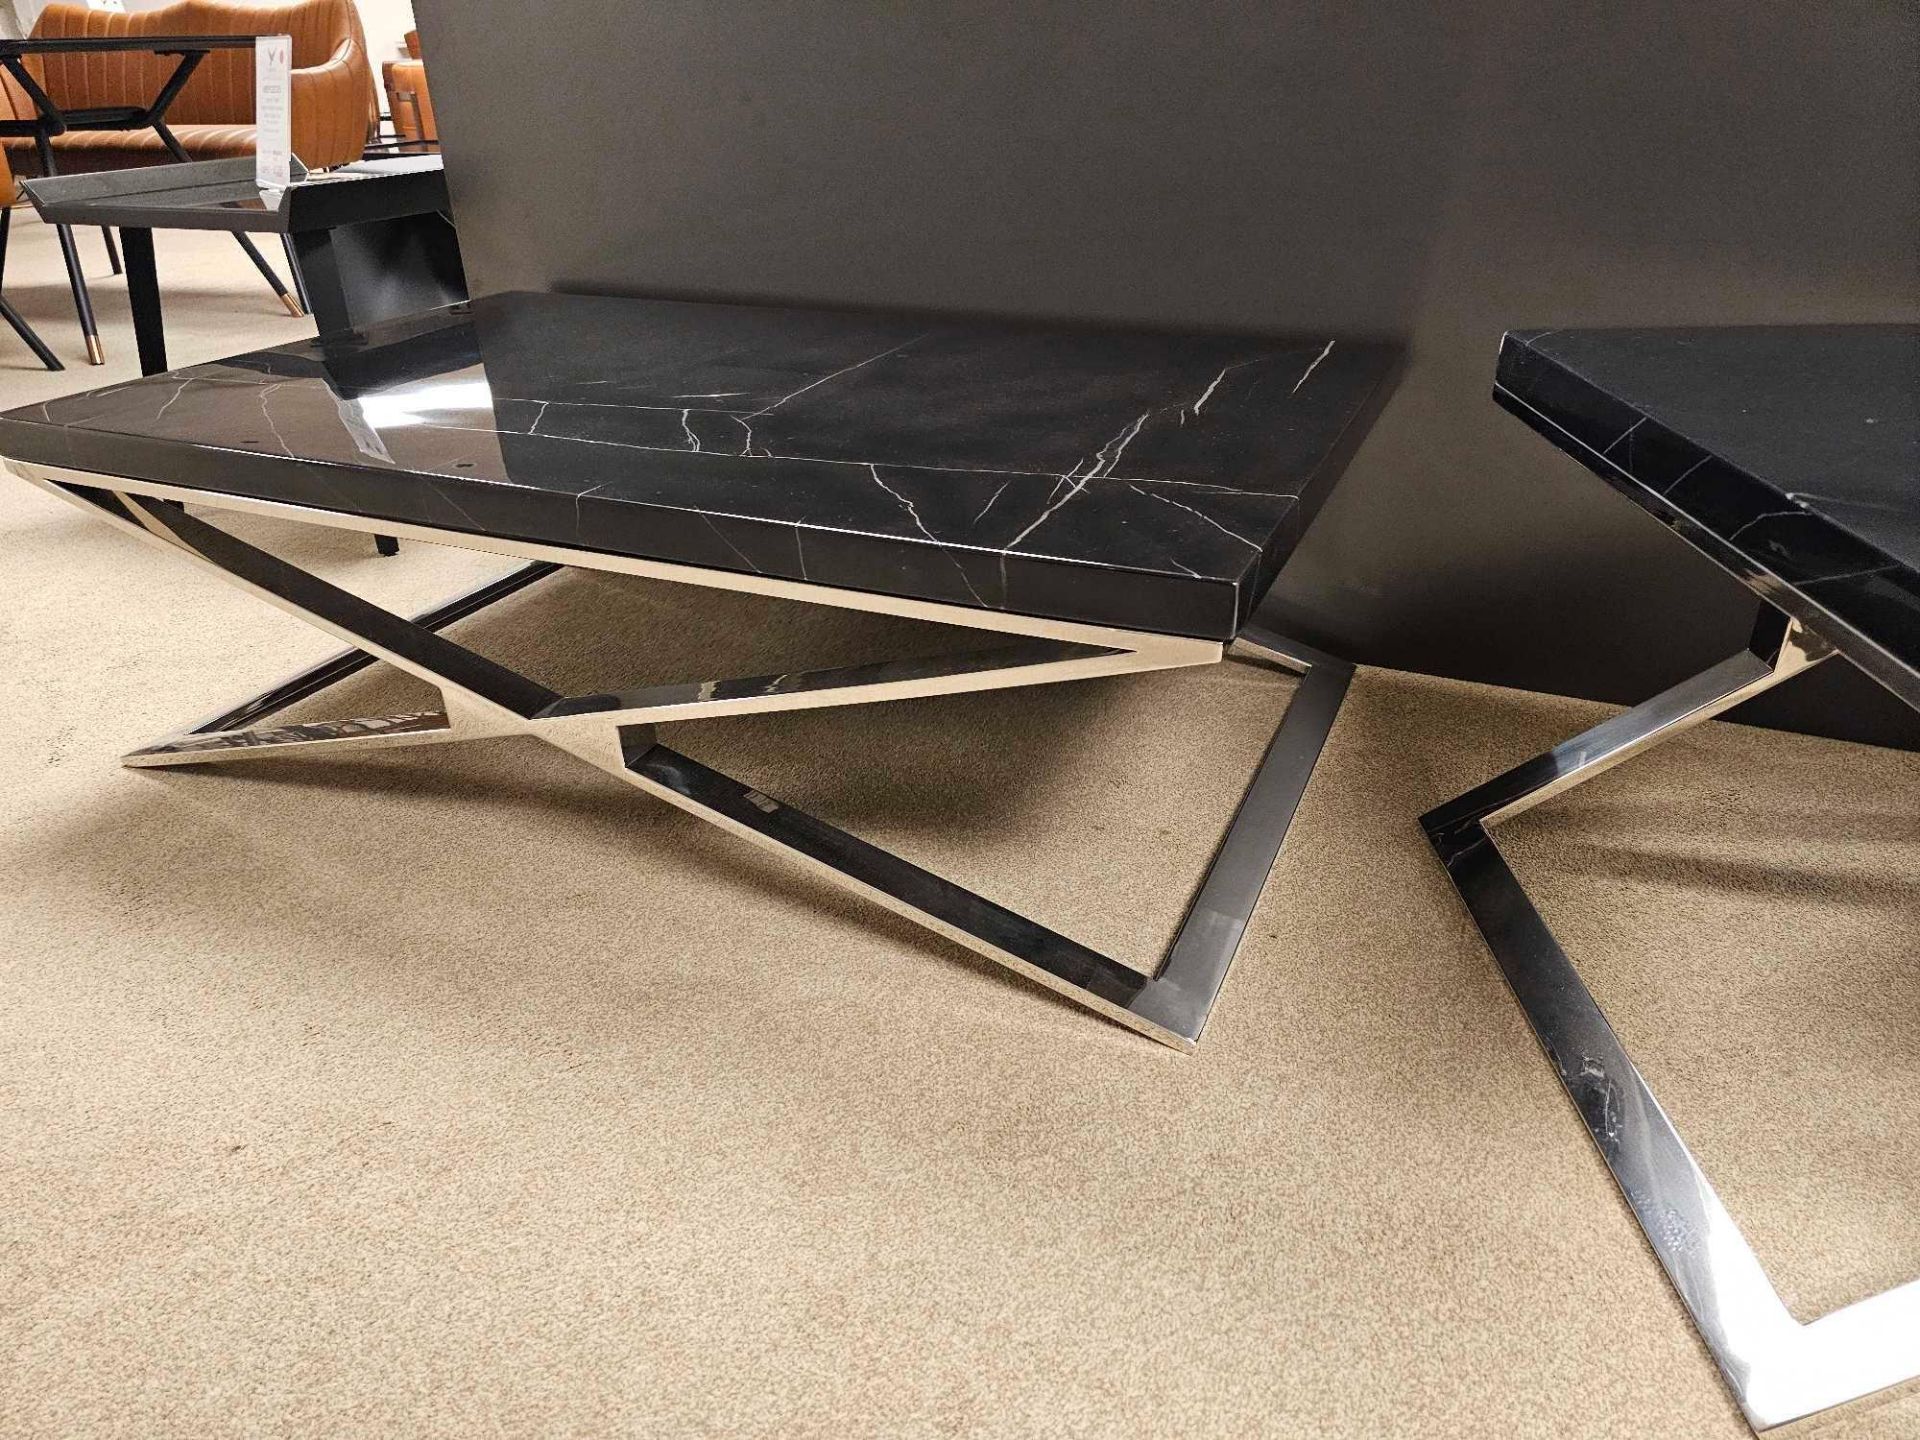 Zephyr Coffee Table by Kesterport This coffee Table has a classic frame design which we have updated - Image 4 of 7